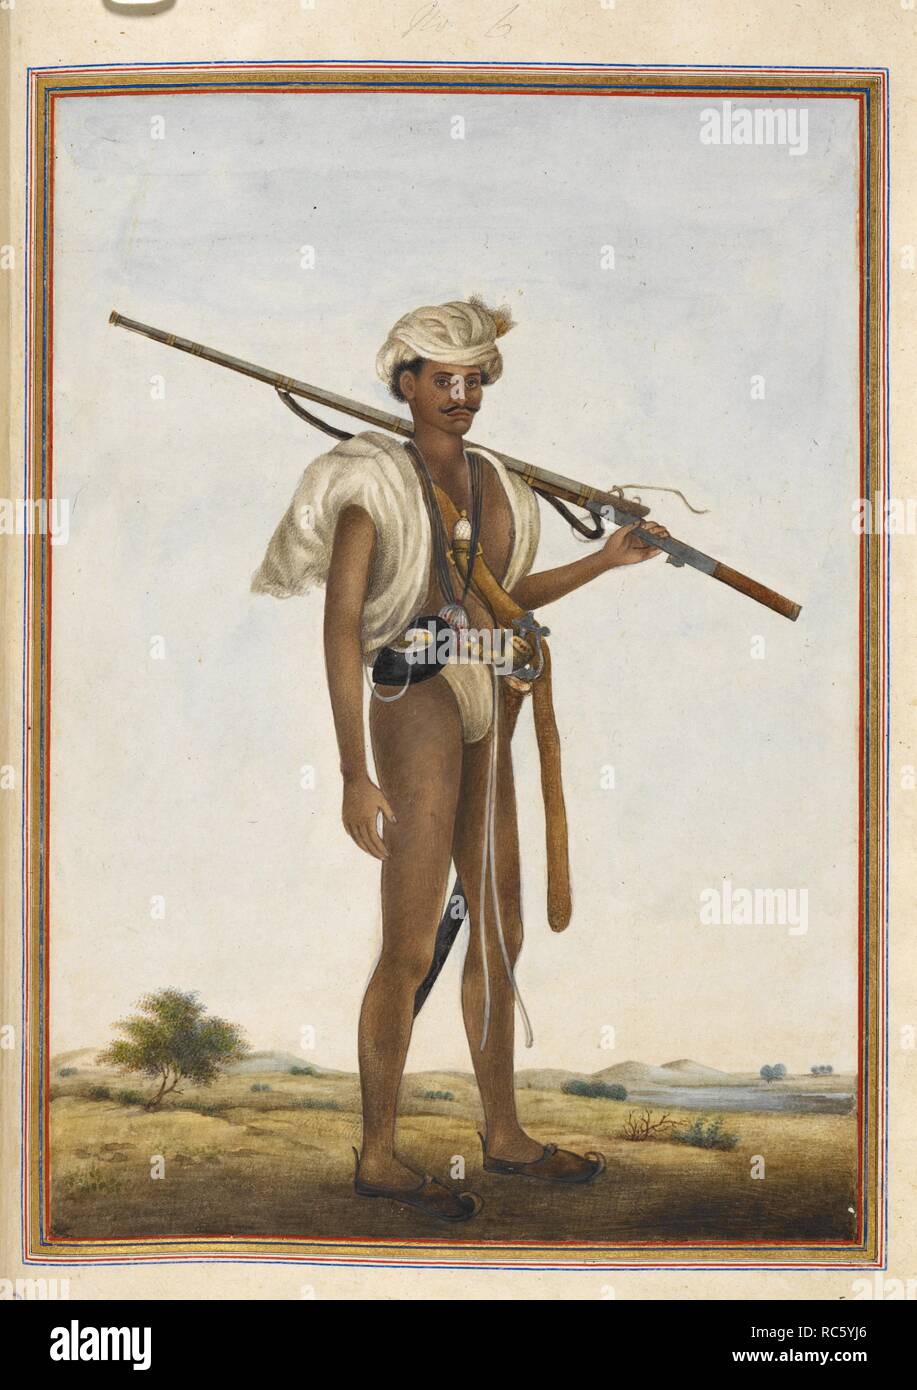 Warrior (Mevati). Mevati, a Kshatriya group who lived in the region south-west of Delhi and were warriors more usually termed Meos. Tashrih al-aqvam, an account of origins and occupations of some of the sects, castes and tribes of India. Written at Hansi Cantonment, Hissar District, eighty-five miles north-west of Delhi for Colonel James Skinner. 1825. Source: Add. 27255, f.70v. Language: Persian. Author: ANON. Stock Photo